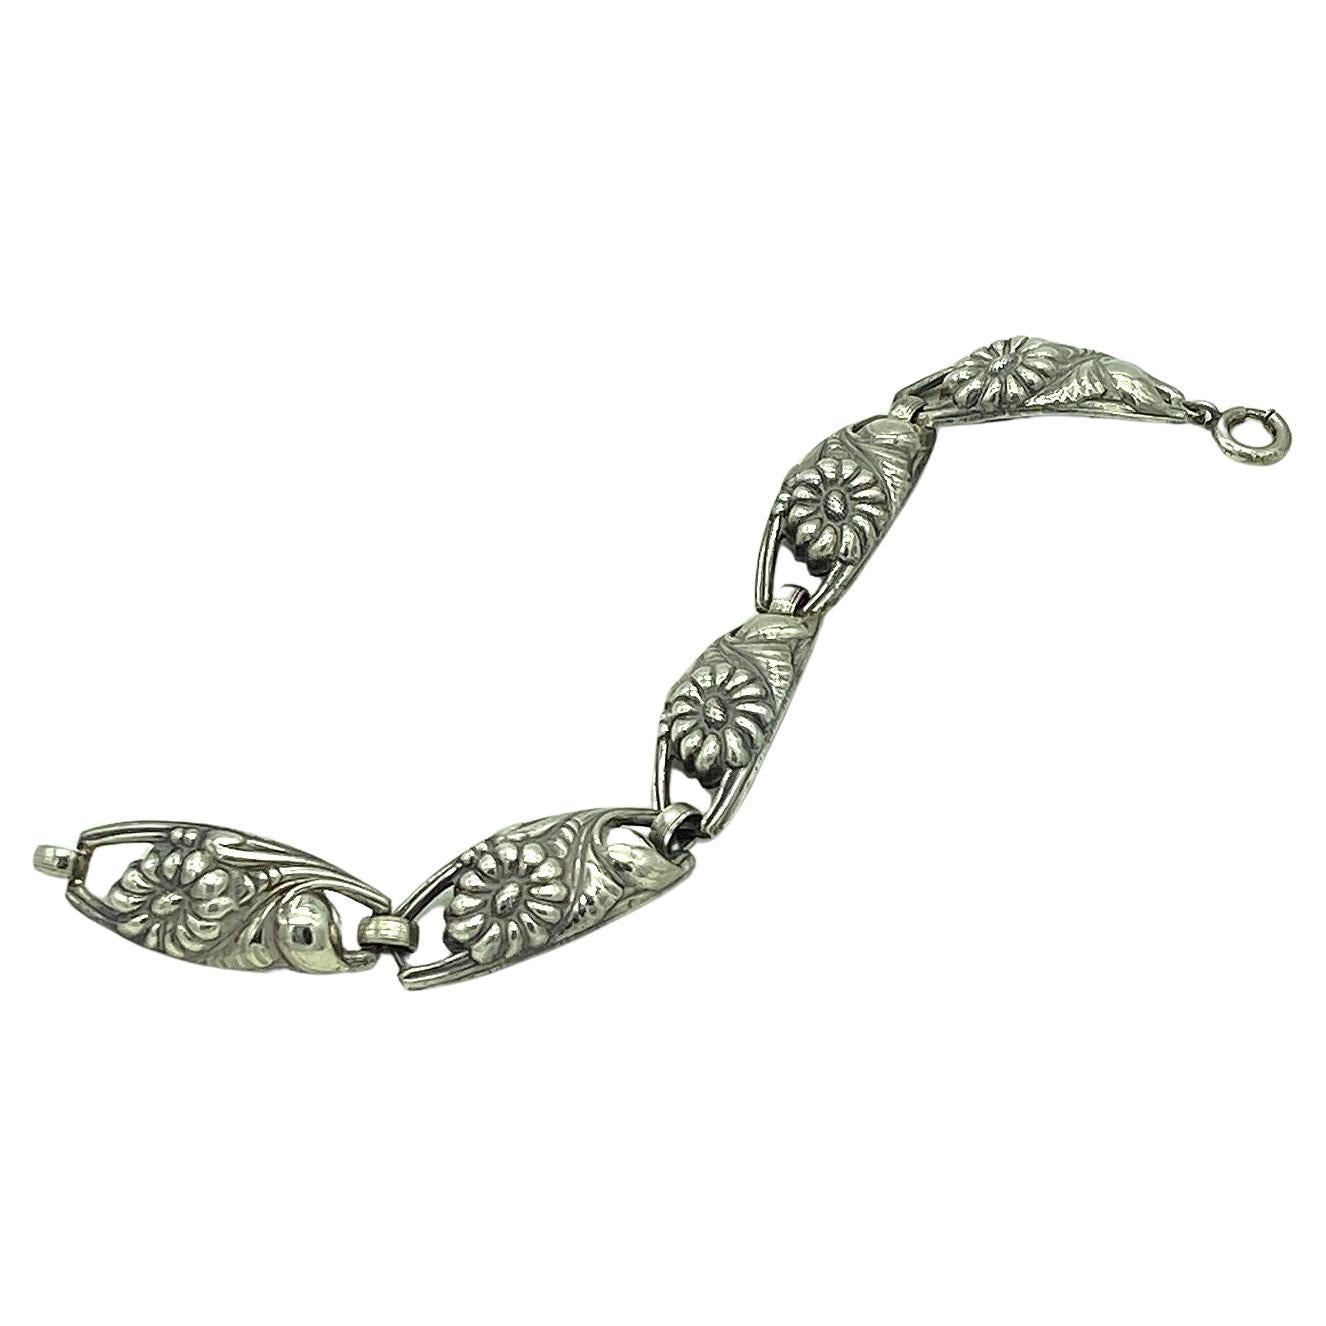 This is a 1930s Art Nouveau style sterling silver bracelet. It has five deeply embossed flower linked sections and a spring ring clasp.  Marked 